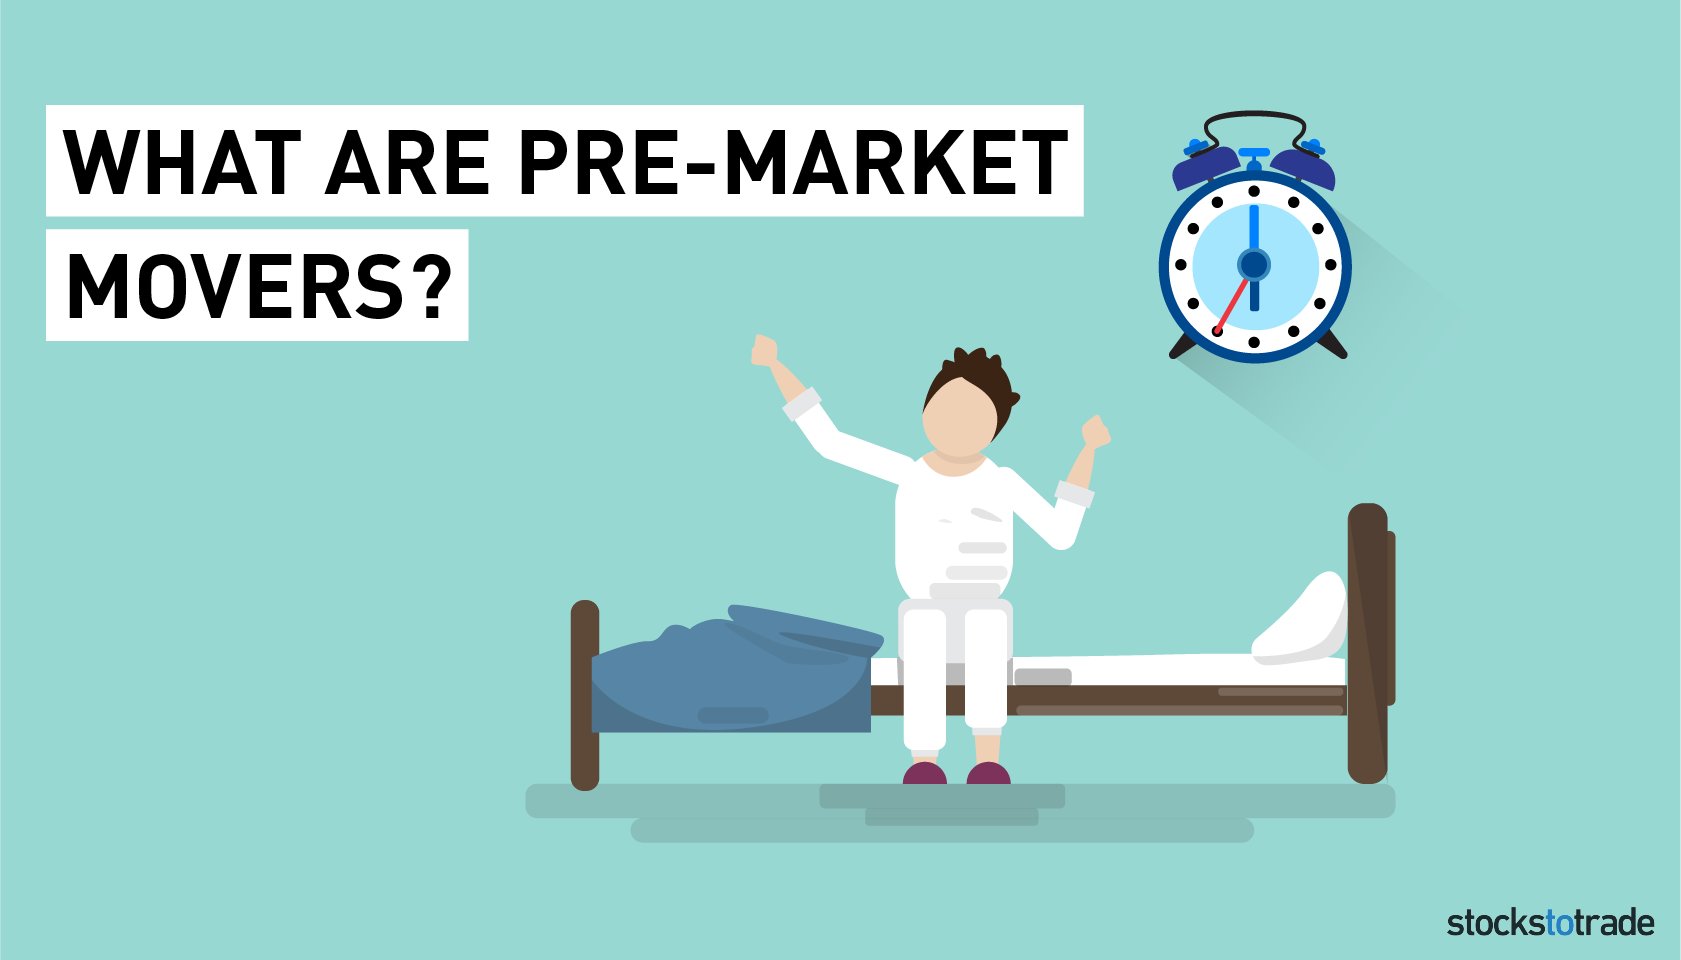 What Are Pre-Market Movers?